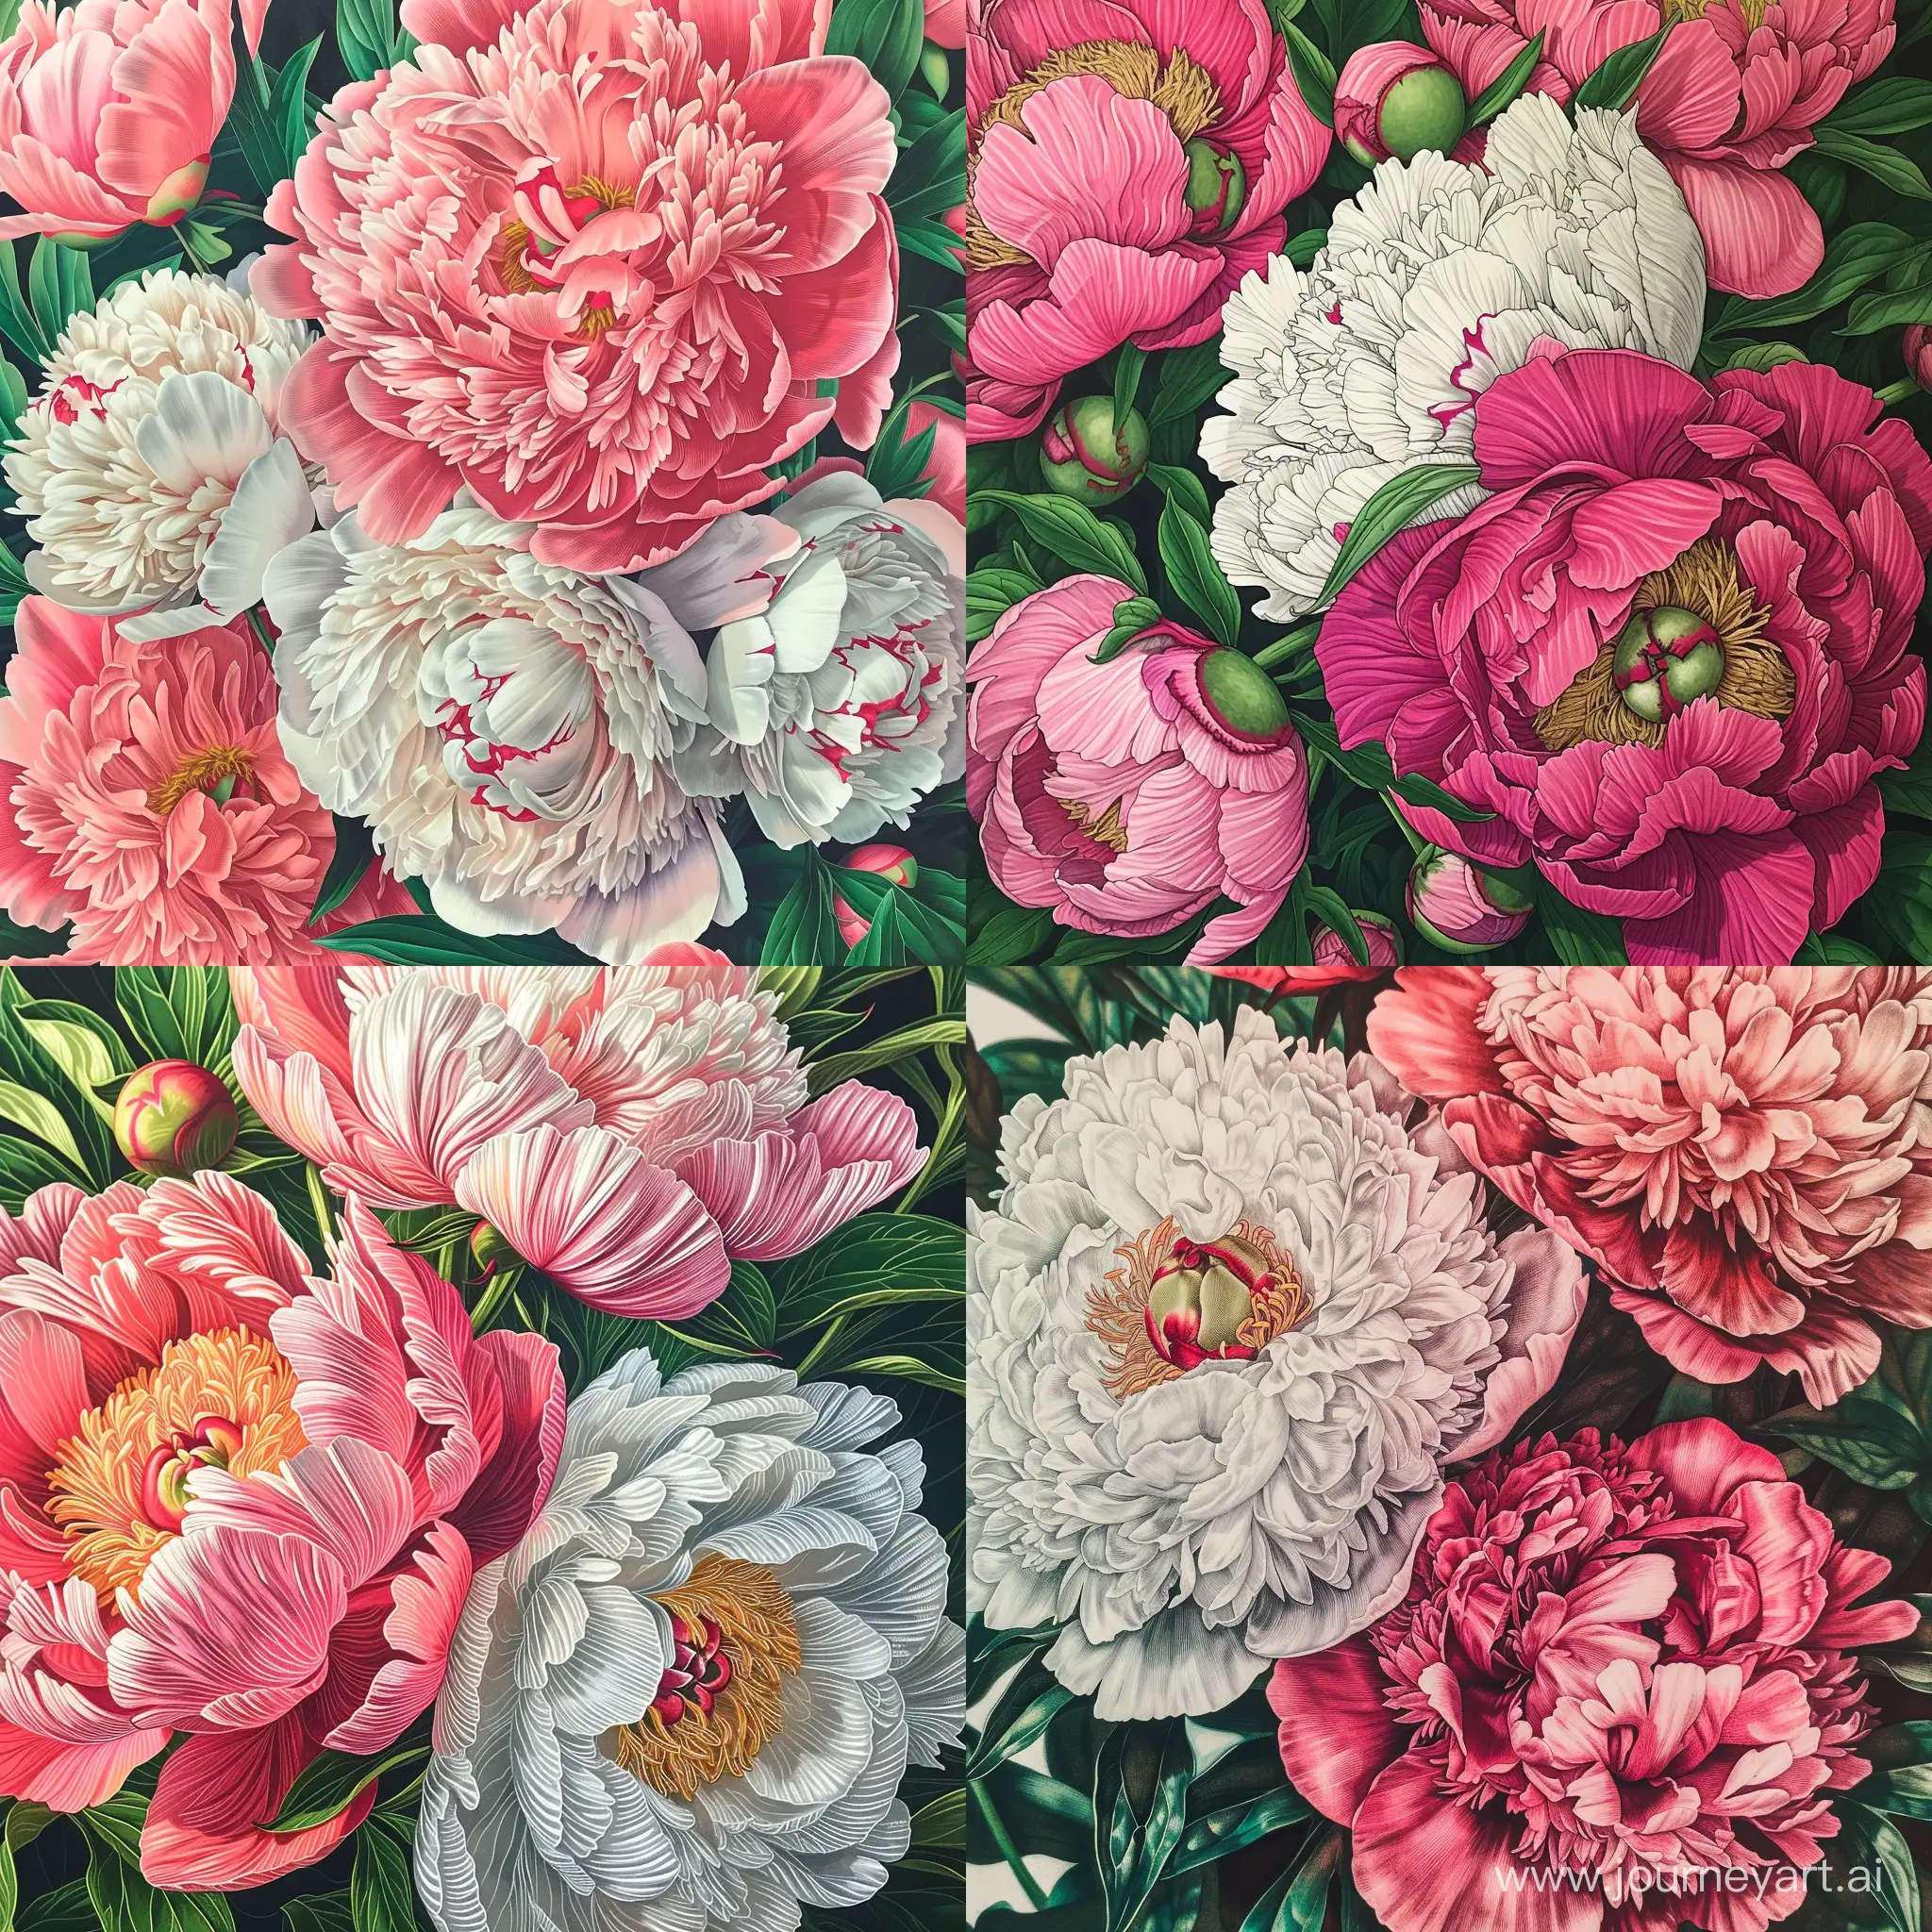 Vibrant-Risograph-Peonies-HyperRealistic-Floral-Art-with-Georgia-OKeeffe-Style